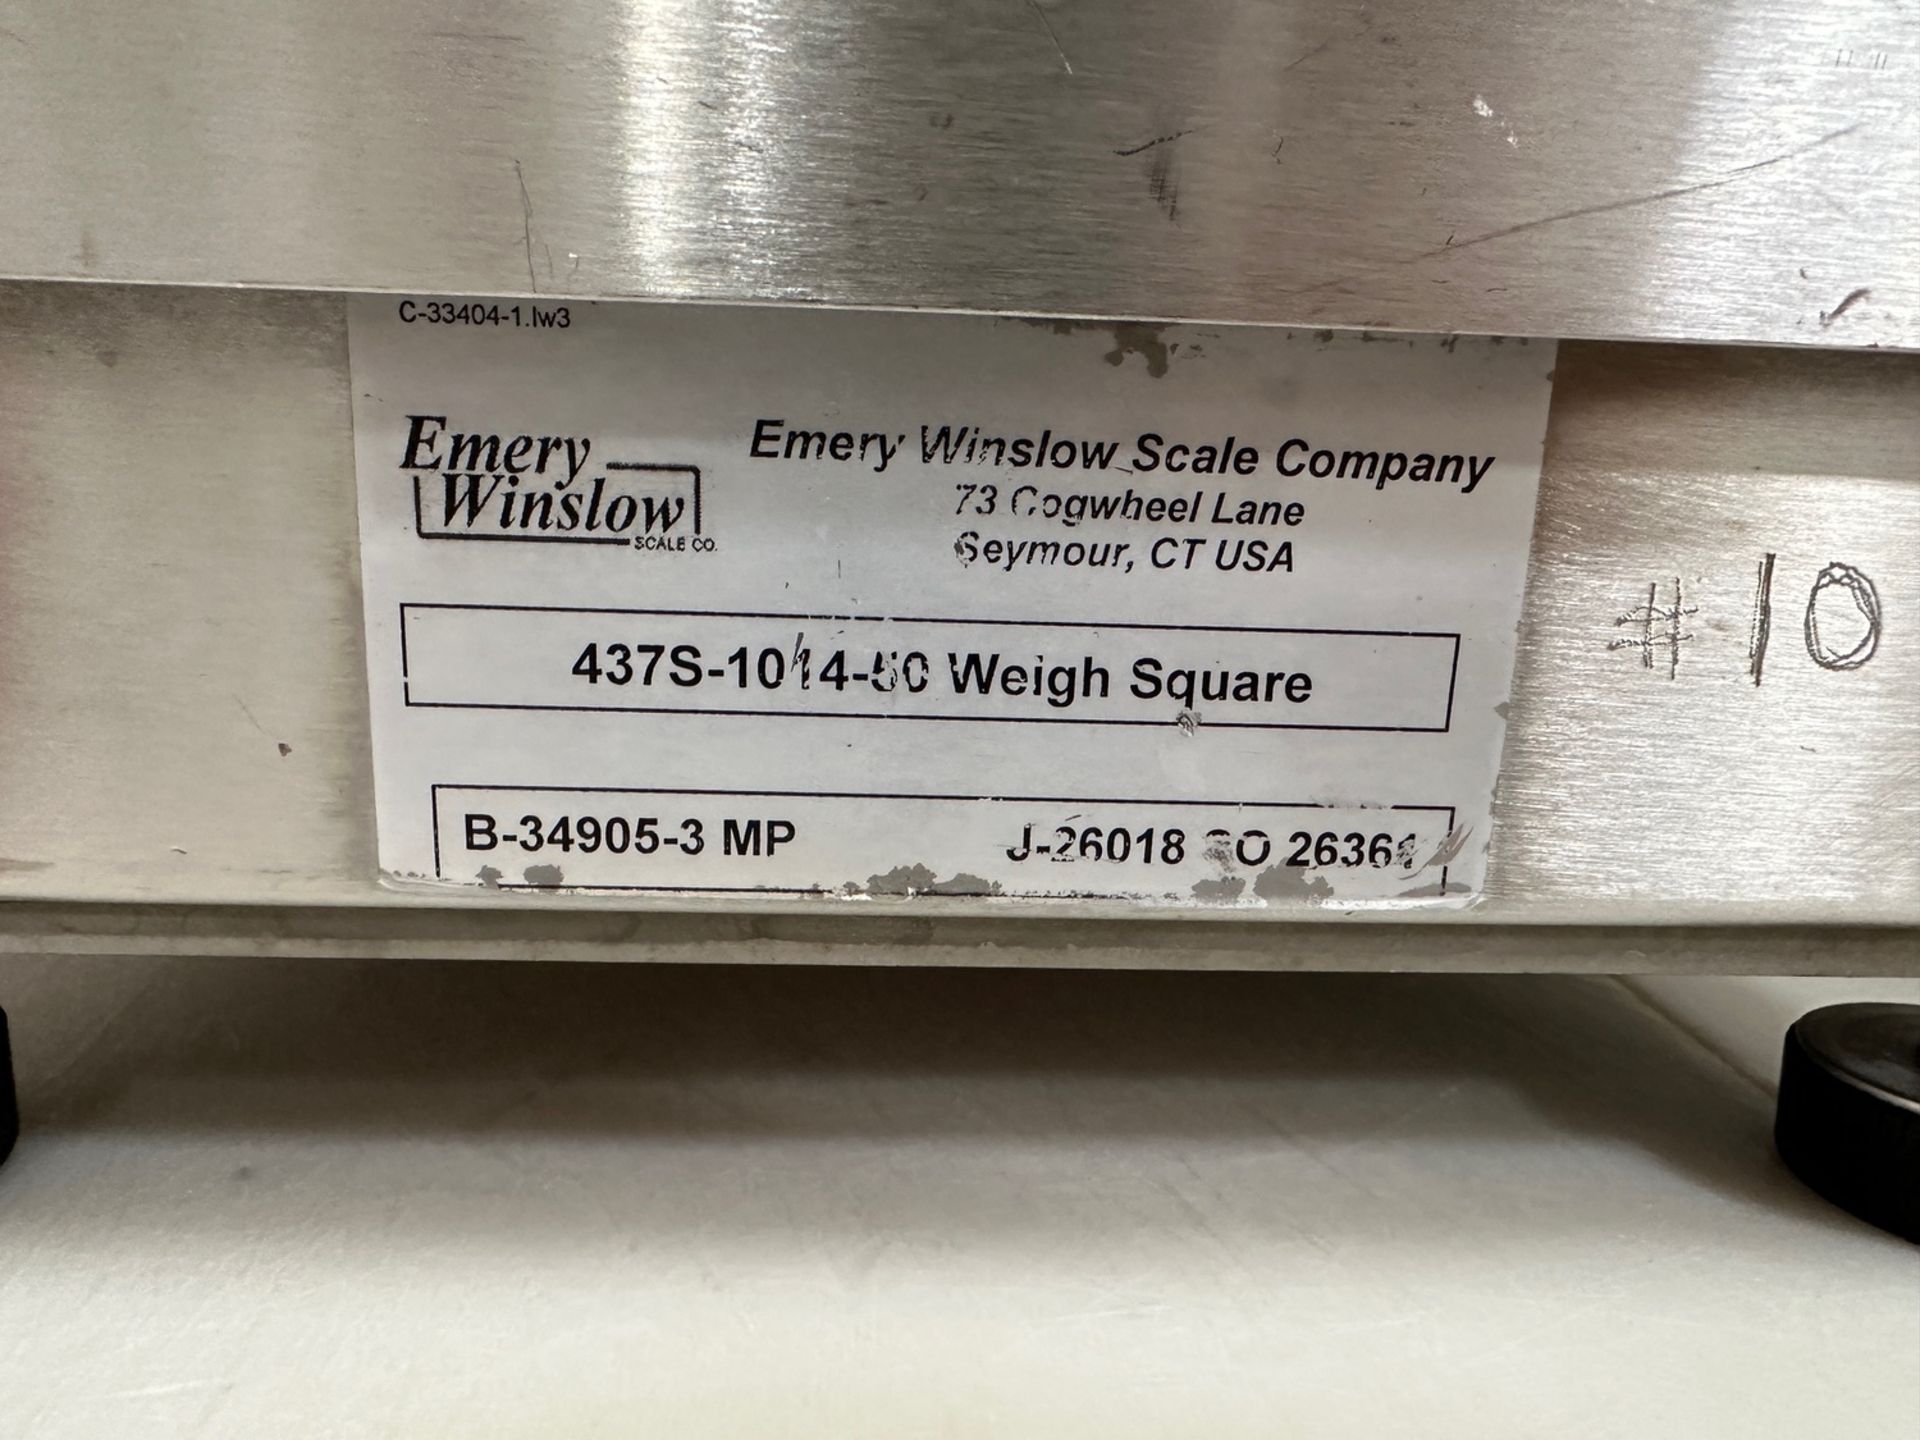 Emery Winslow Stainless Bench Top Scale, Model 7400E, 18"x18", 437S-10 - Subj to Bulk | Rig Fee $25 - Image 3 of 7